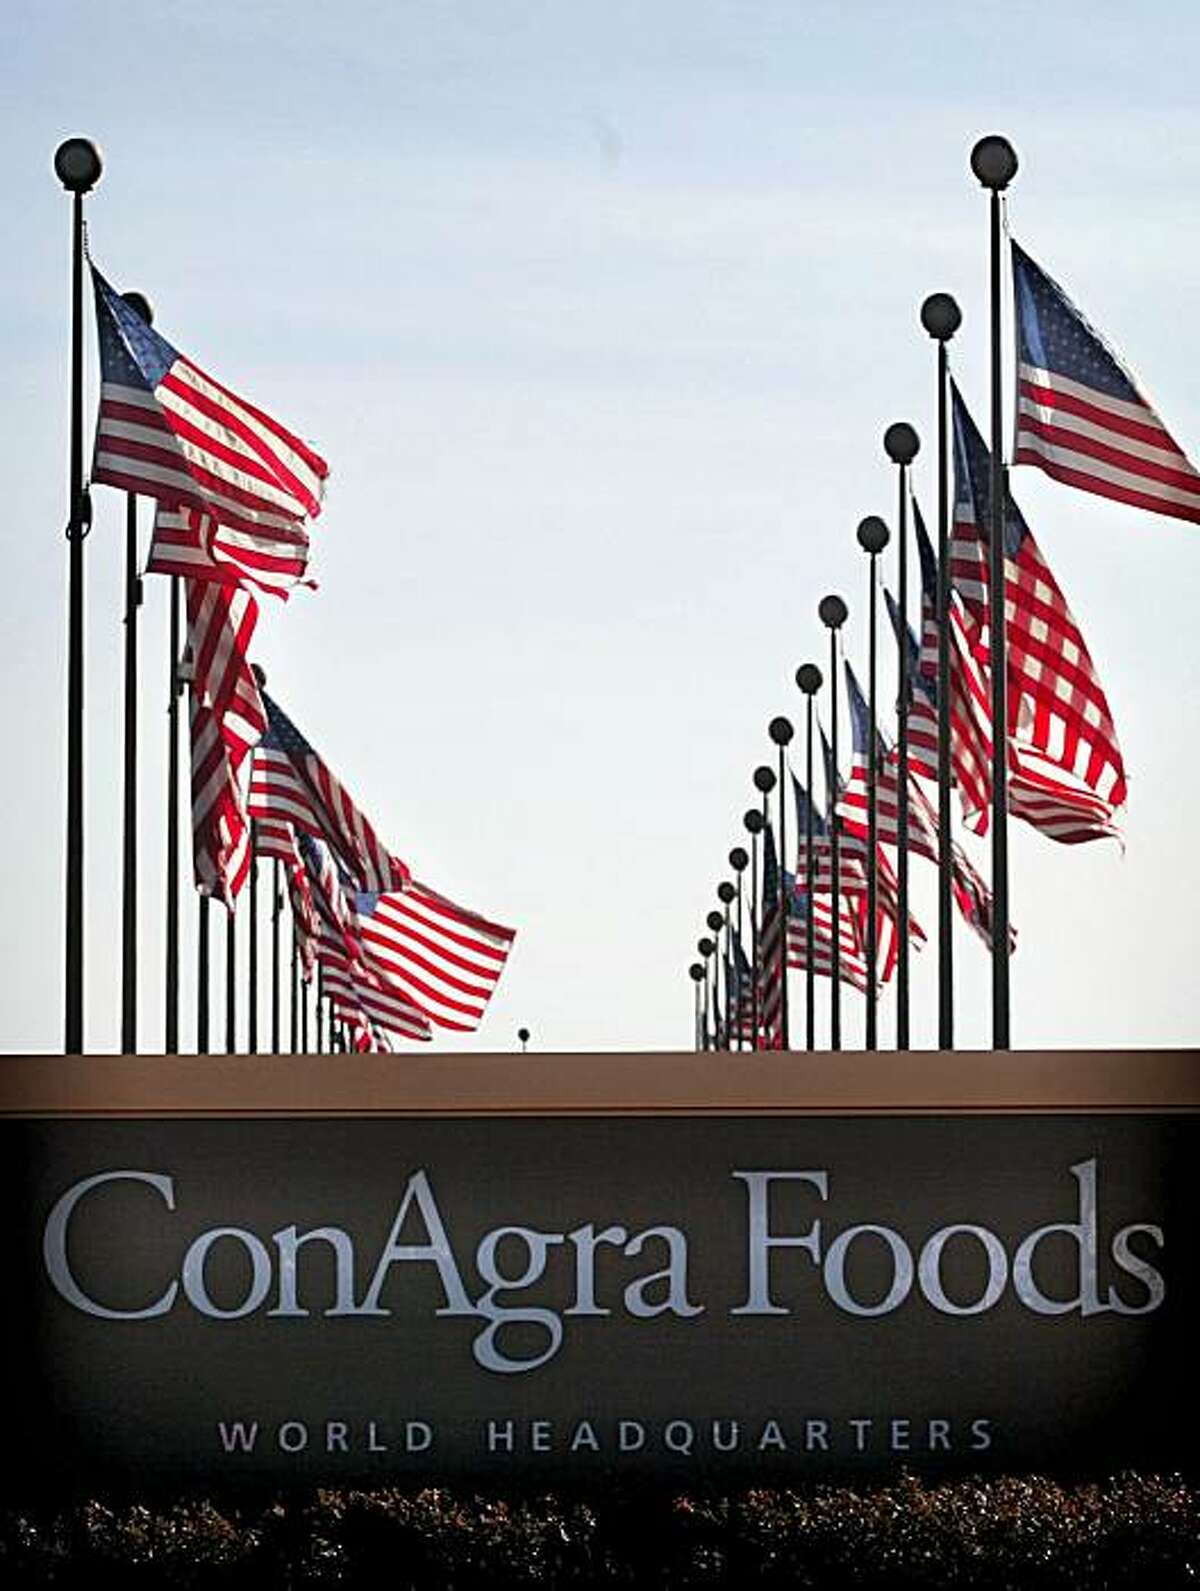 ConAgra Foods Inc. corporate headquarters are pictured in Omaha, Nebraska on Wednesday December 22, 2004. ConAgra Foods Inc., the third-largest U.S. food company, said second-quarter profit fell 10 percent after the sale of its chicken business and a rise in ingredient costs. Photographer: Eric Francis/ Bloomberg News.